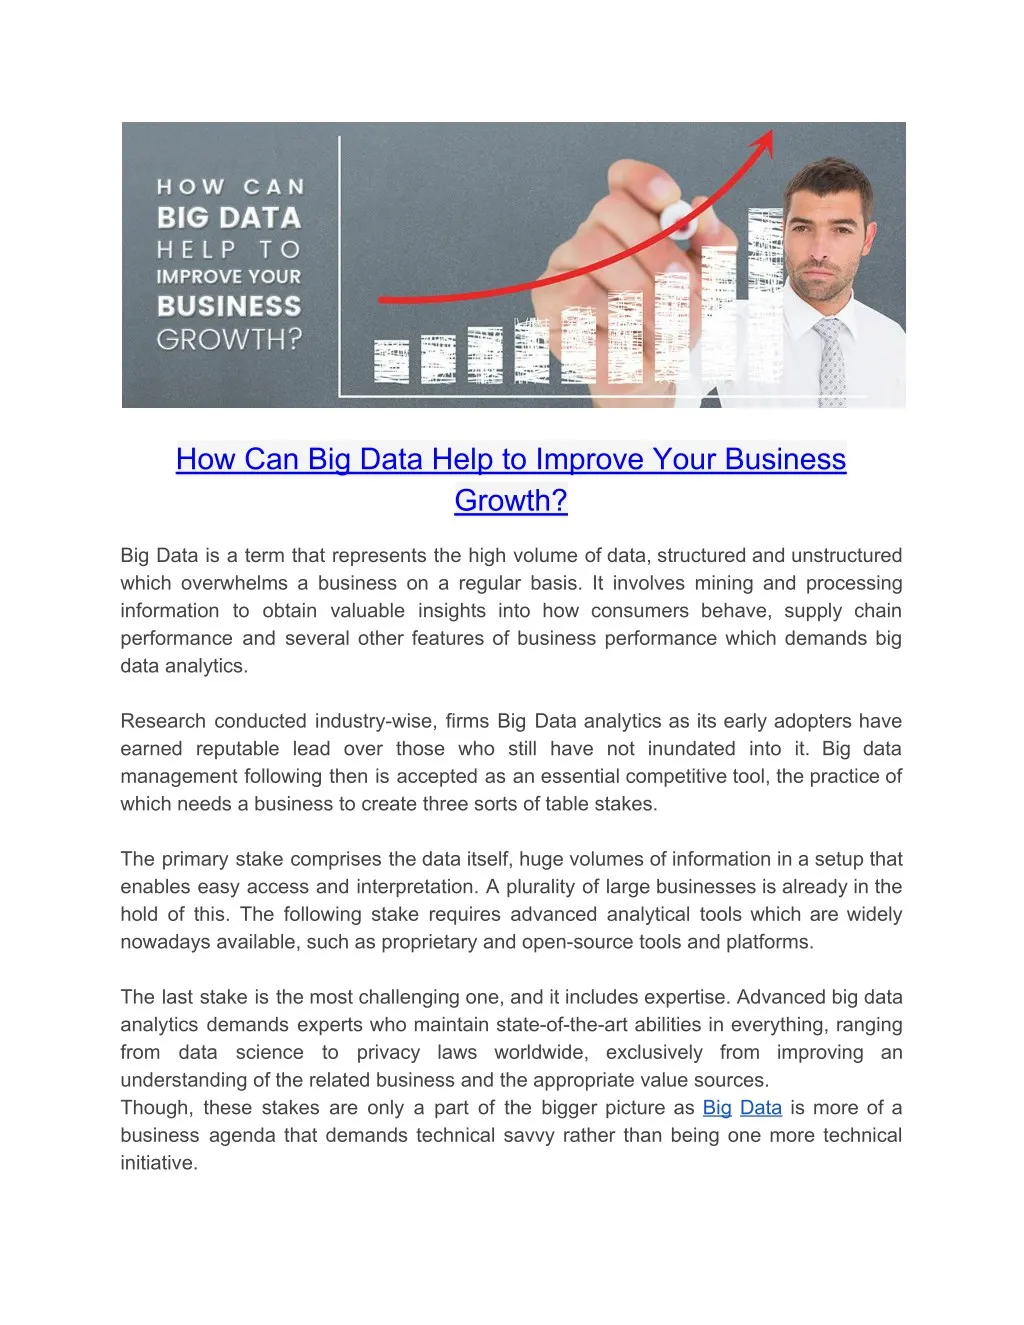 how can big data help to improve your business